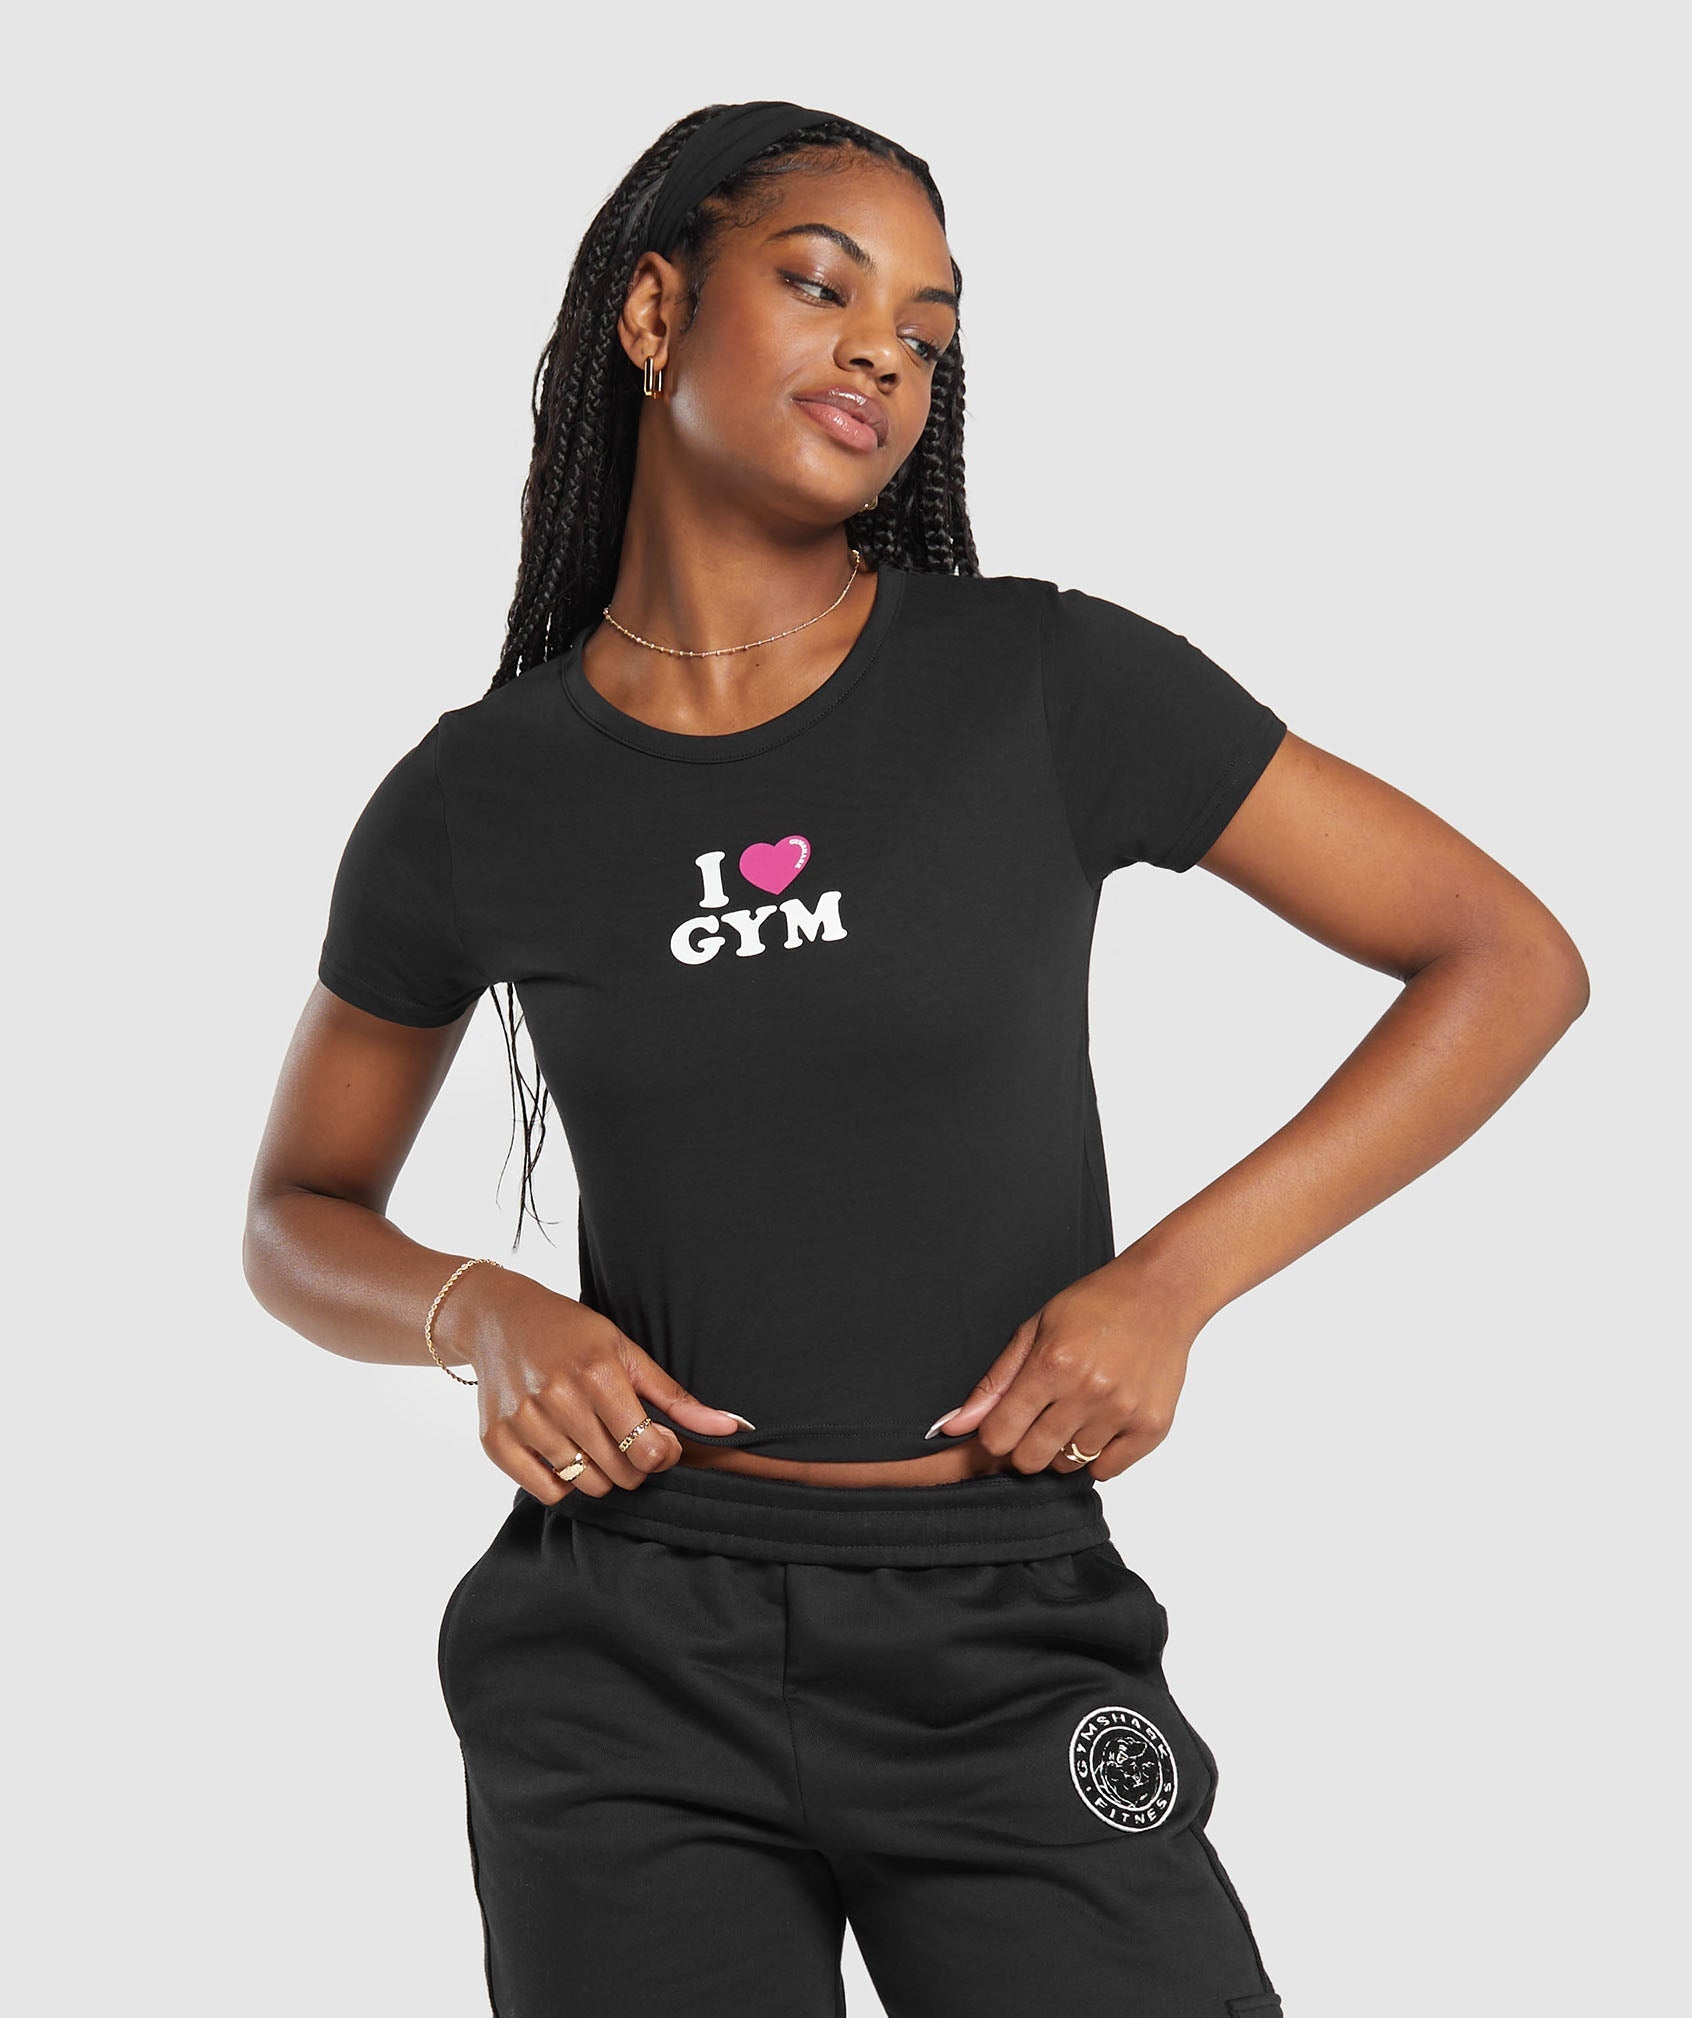 I Heart Gym Baby T-Shirt in Black - view 1